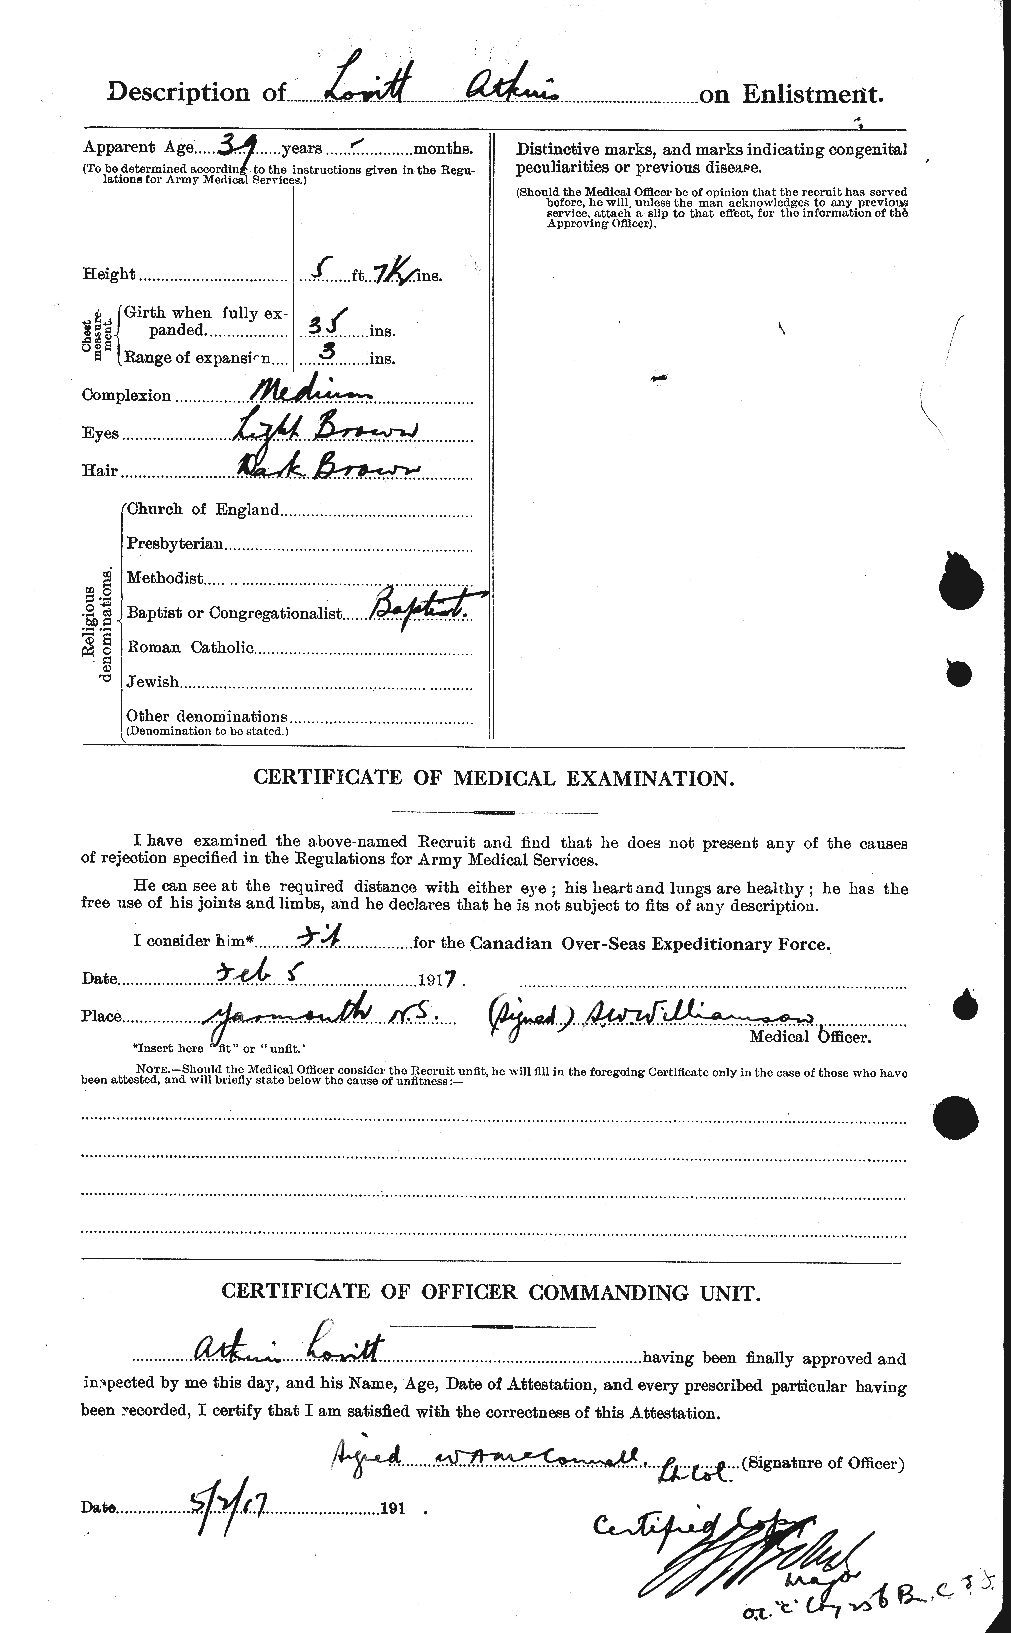 Personnel Records of the First World War - CEF 216803b